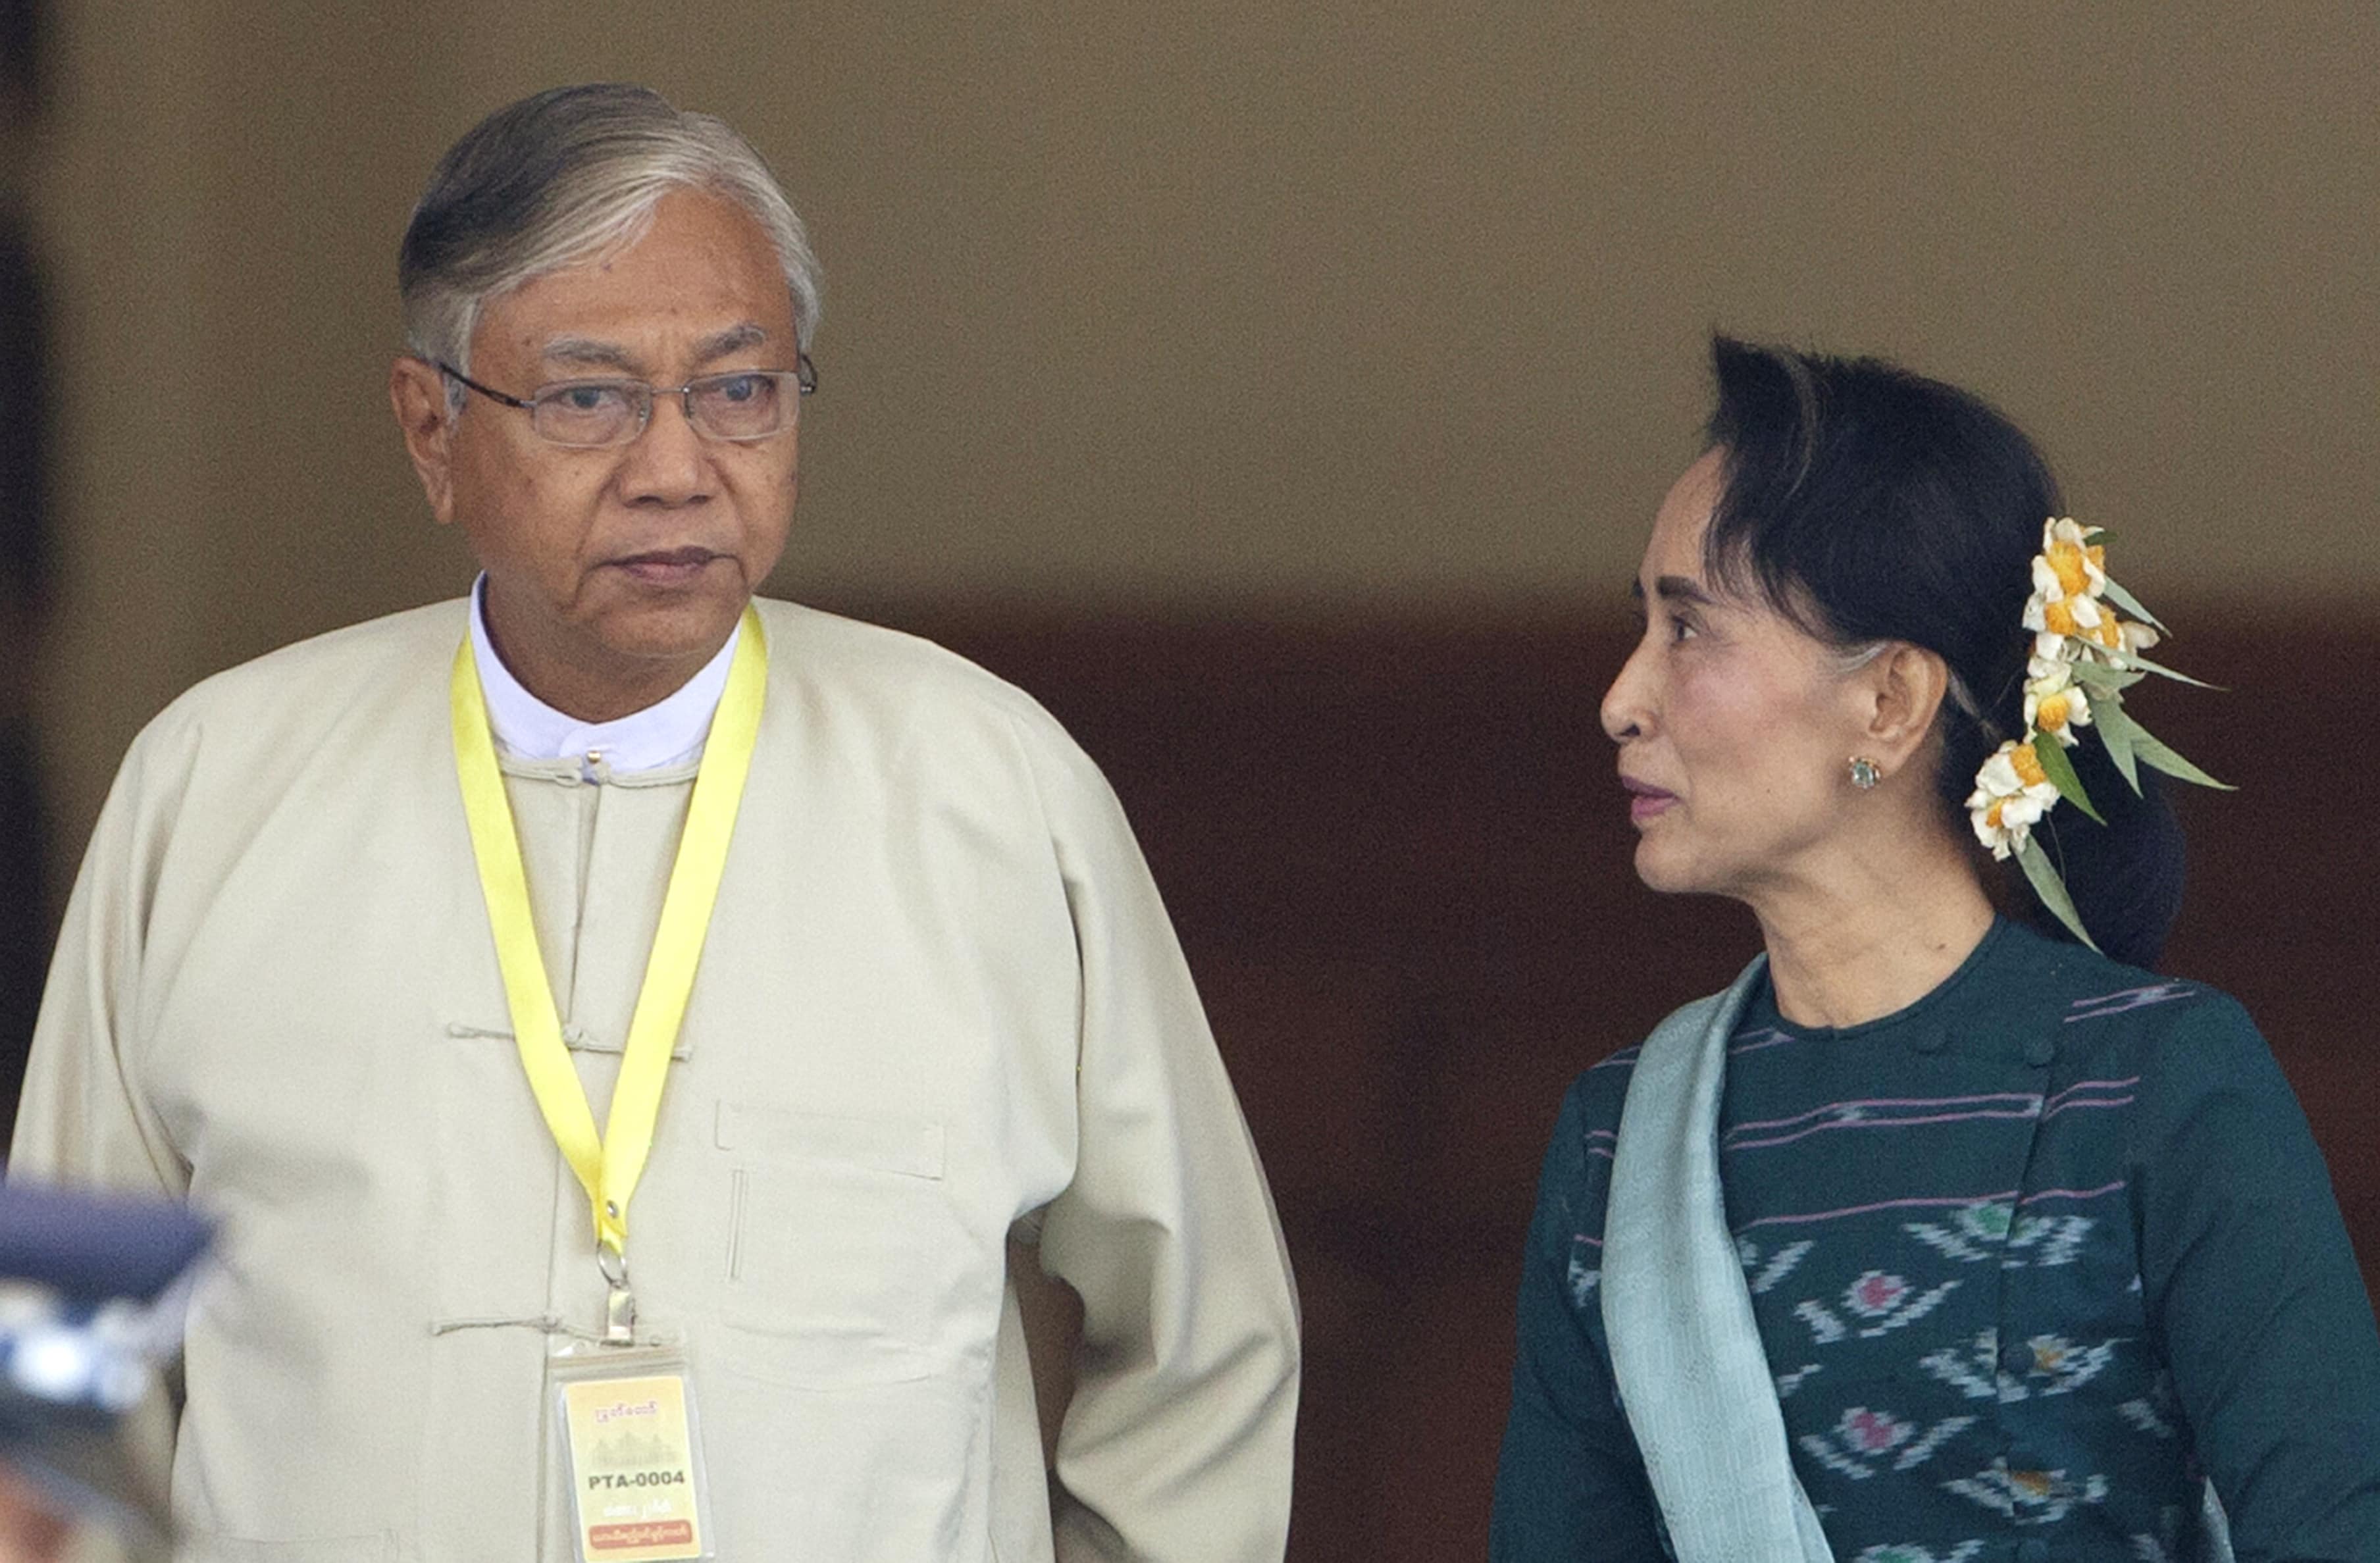 Htin Kyaw, left, newly elected president of Myanmar, walks with National League for Democracy leader Aung San Suu Kyi, right, at Myanmar's parliament in Naypyitaw, Myanmar, March 15, 2016. , Aung Shine Oo, AP